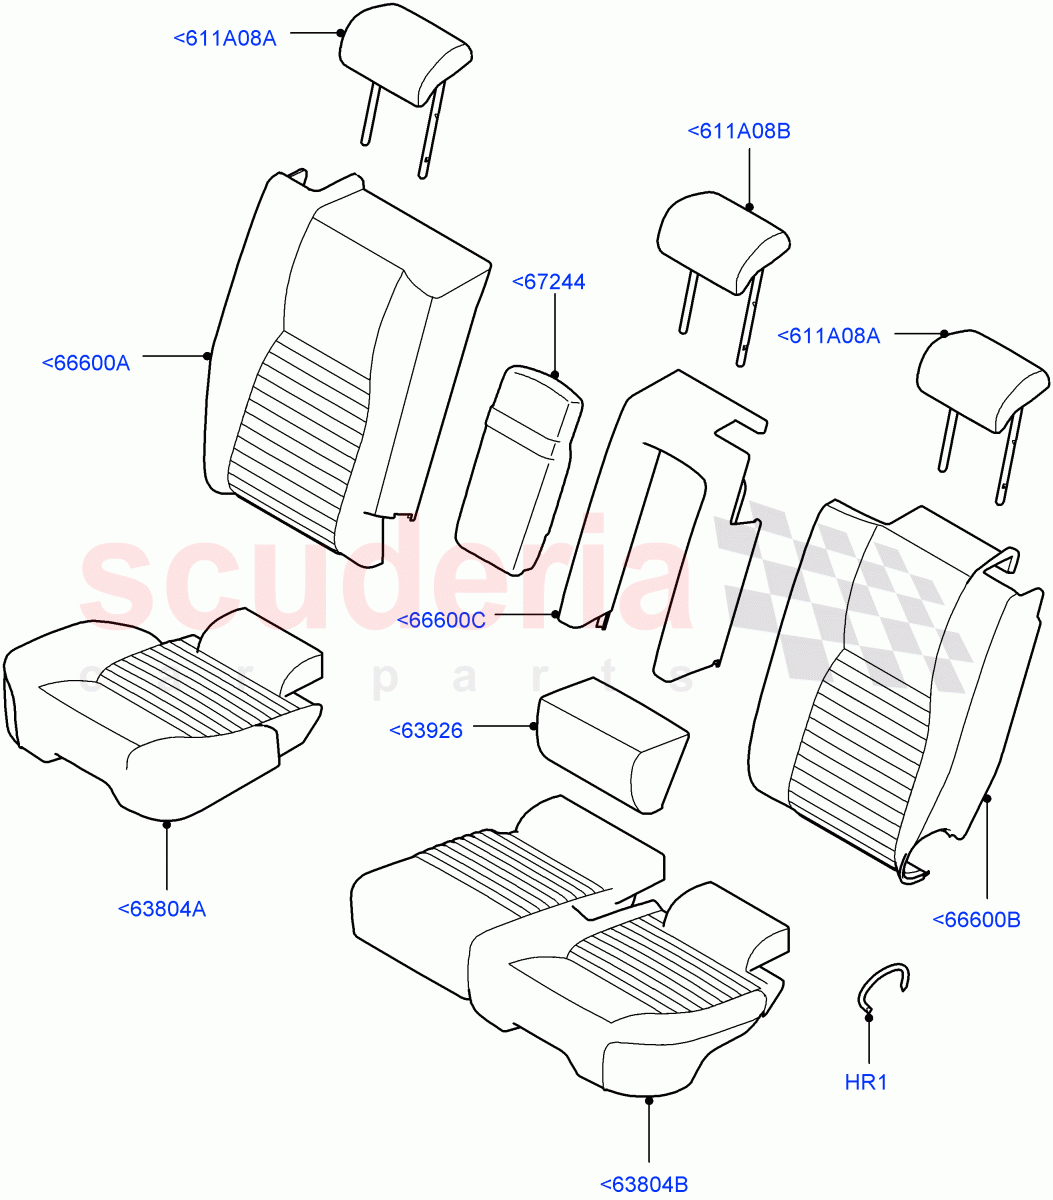 Rear Seat Covers(Taurus Leather Perforated,Changsu (China),60/40 Load Through With Slide,With 60/40 Manual Fold Thru Rr Seat)((V)FROMFG000001) of Land Rover Land Rover Discovery Sport (2015+) [2.2 Single Turbo Diesel]